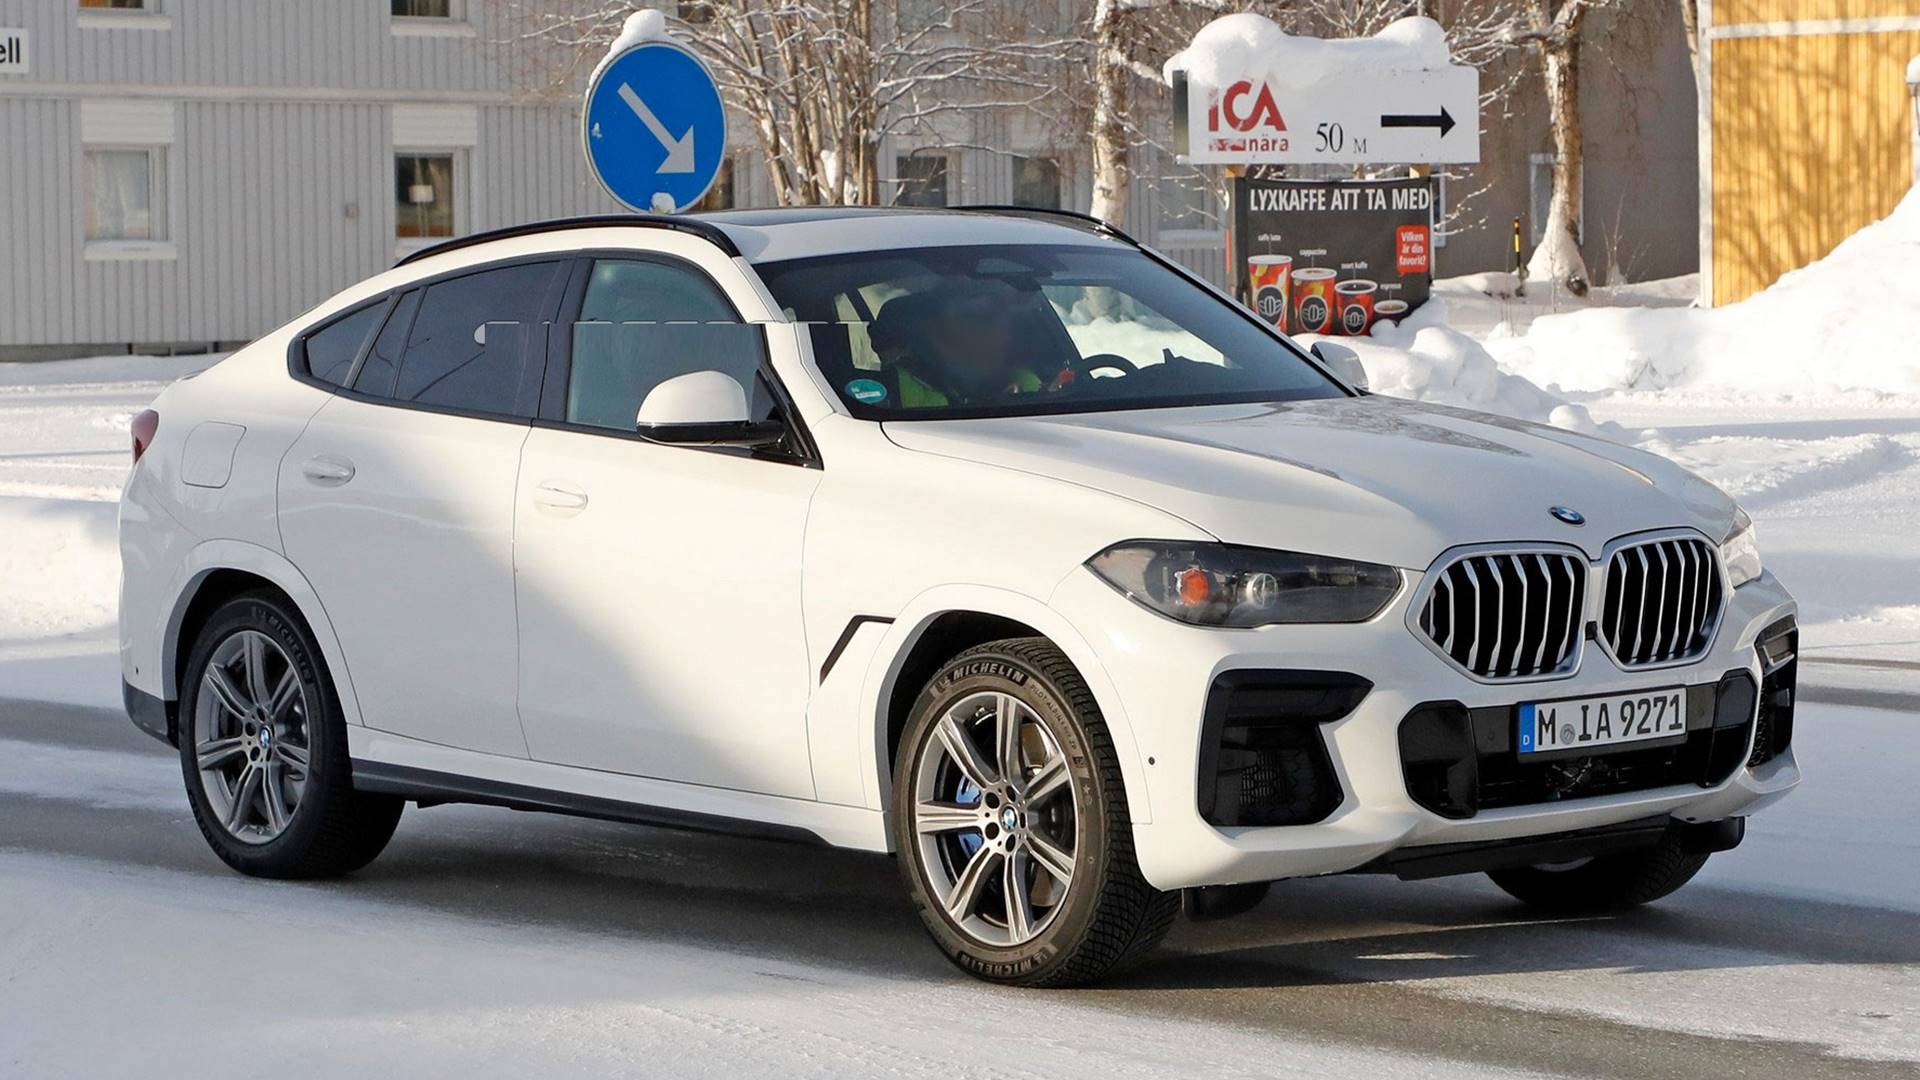 BMW X6 Facelift 2023, Once Again in Winter Trials